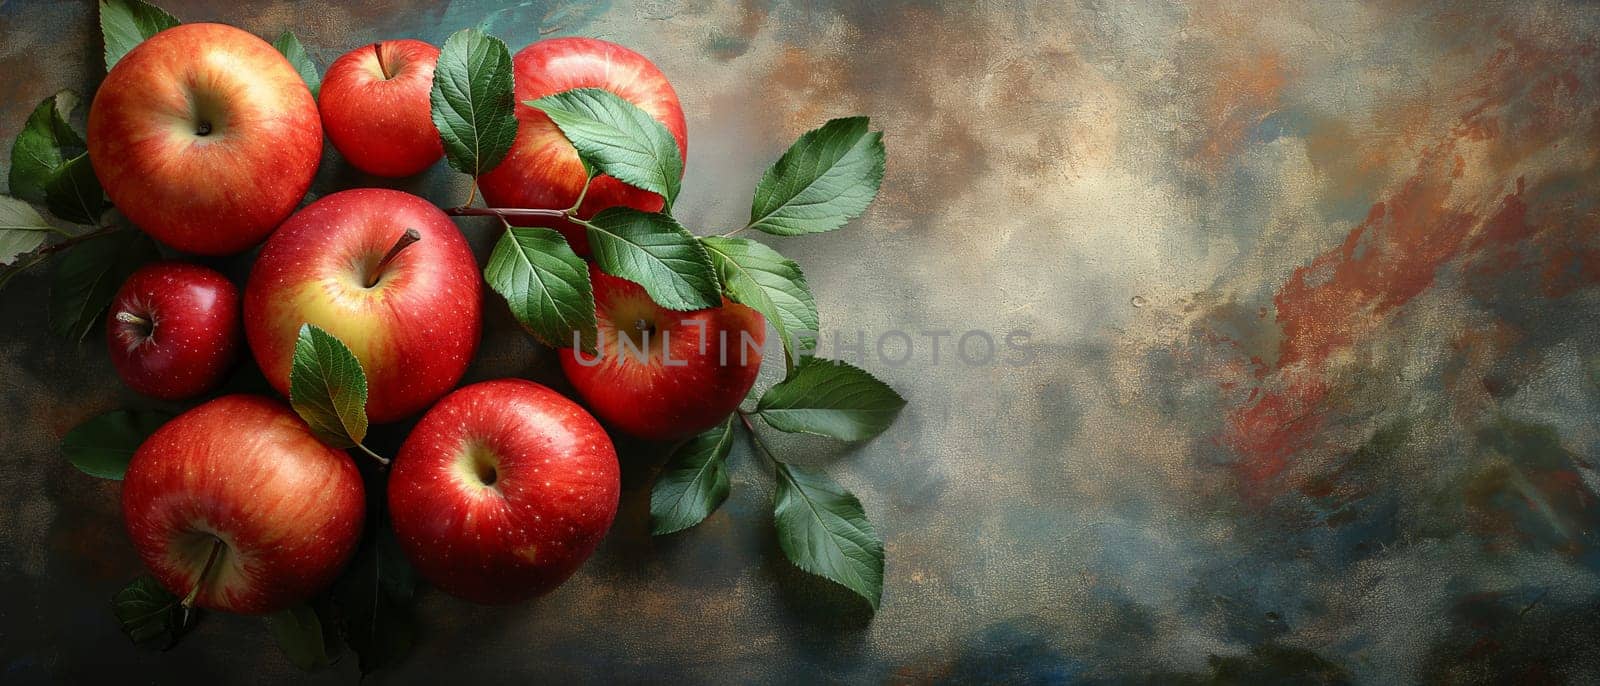 Red apples with leaves on a vintage background. by Fischeron